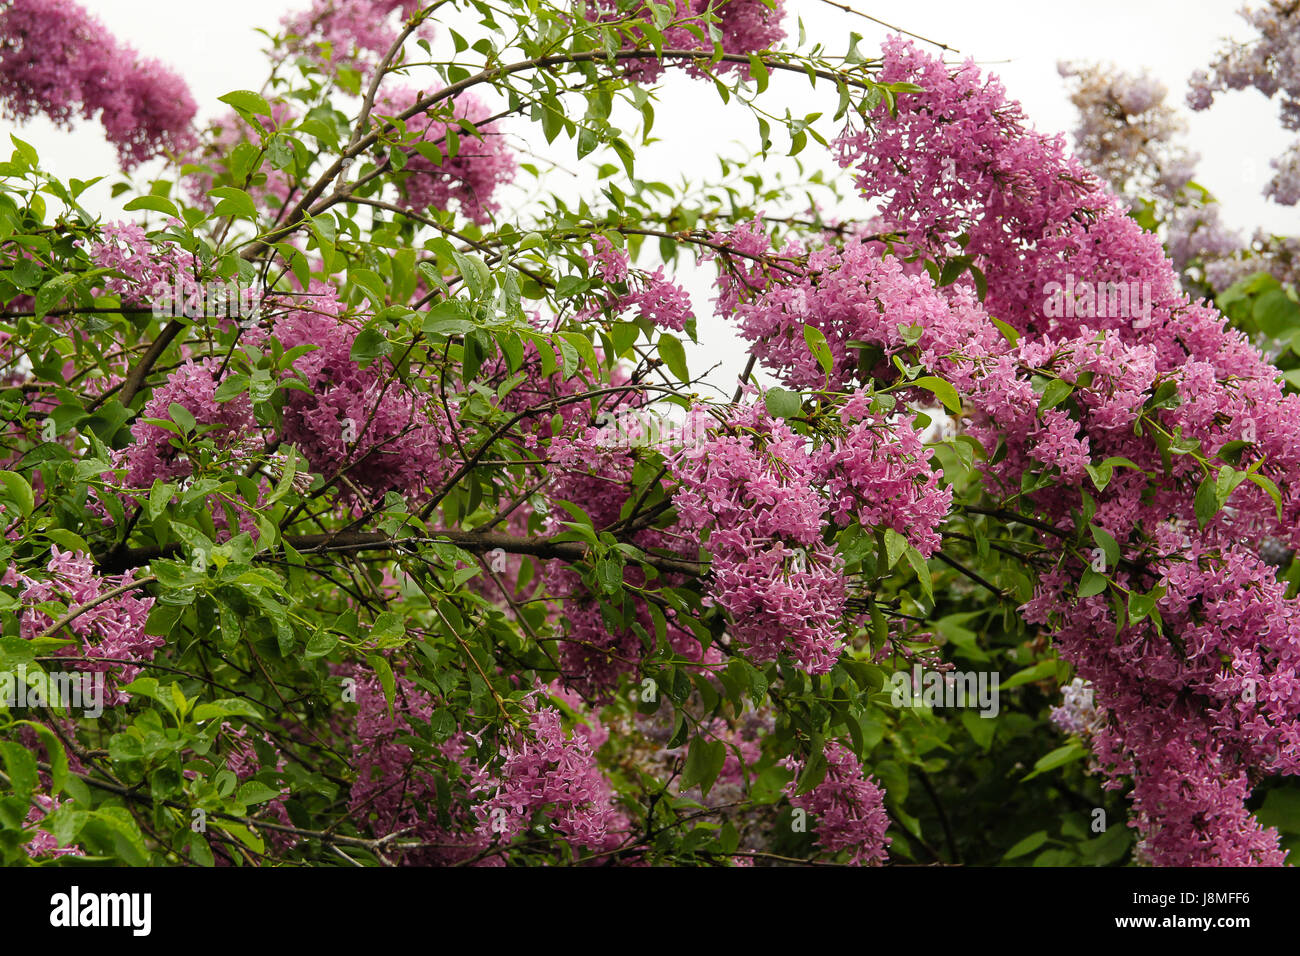 Syringa vulgaris, varietal, Lilac tree. A tall flowering lilac bush with branches forming arcs from the sheer weight of masses of lilac flowers. Stock Photo